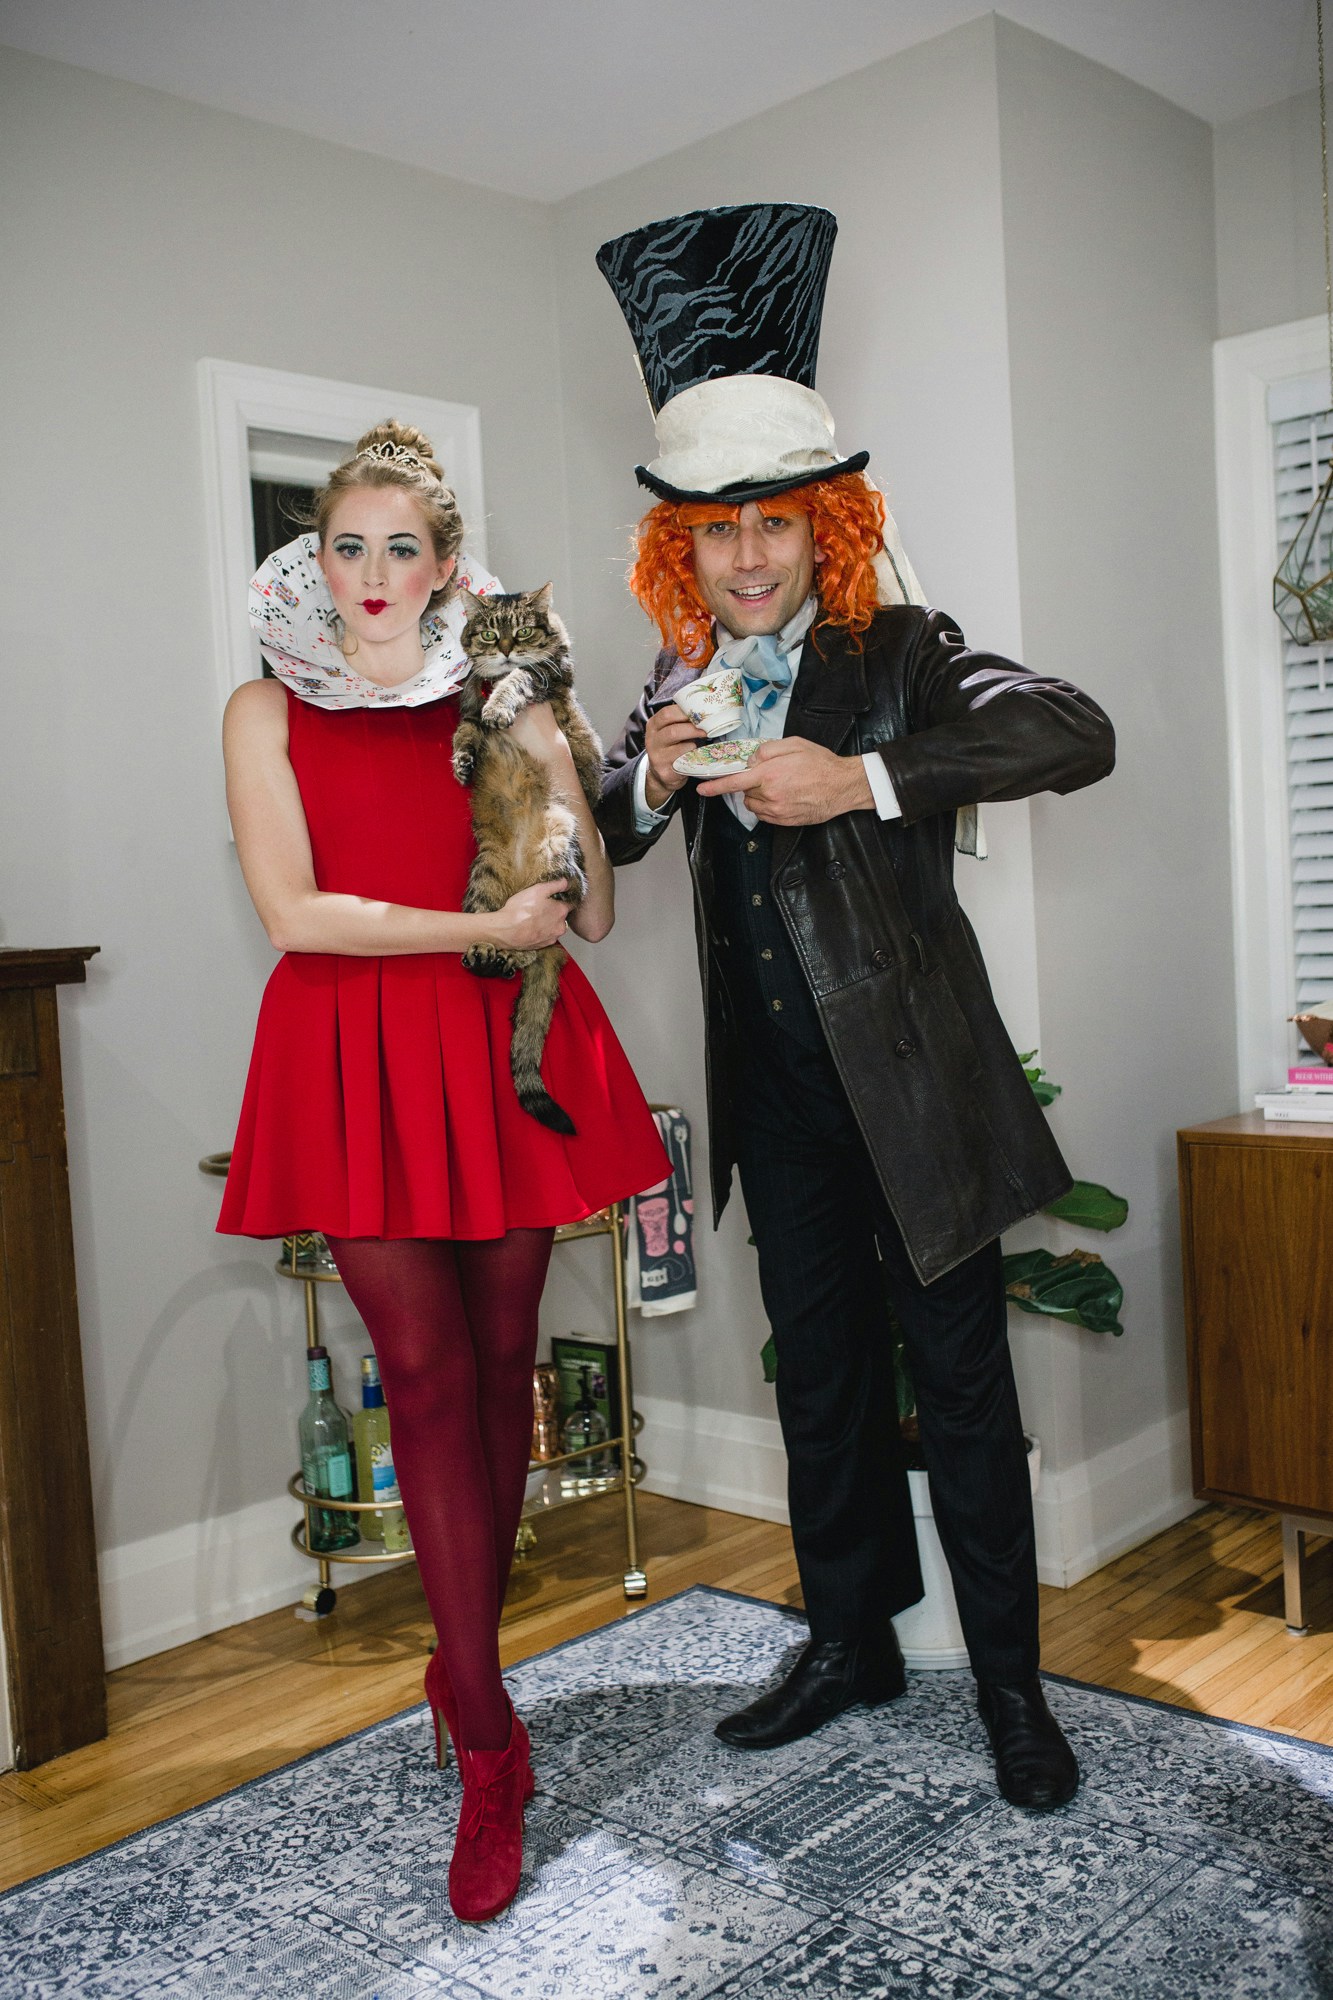 Alice in Wonderland couples halloween costume: Mad Hatter, Queen of Hearts and the Cheshire Cat